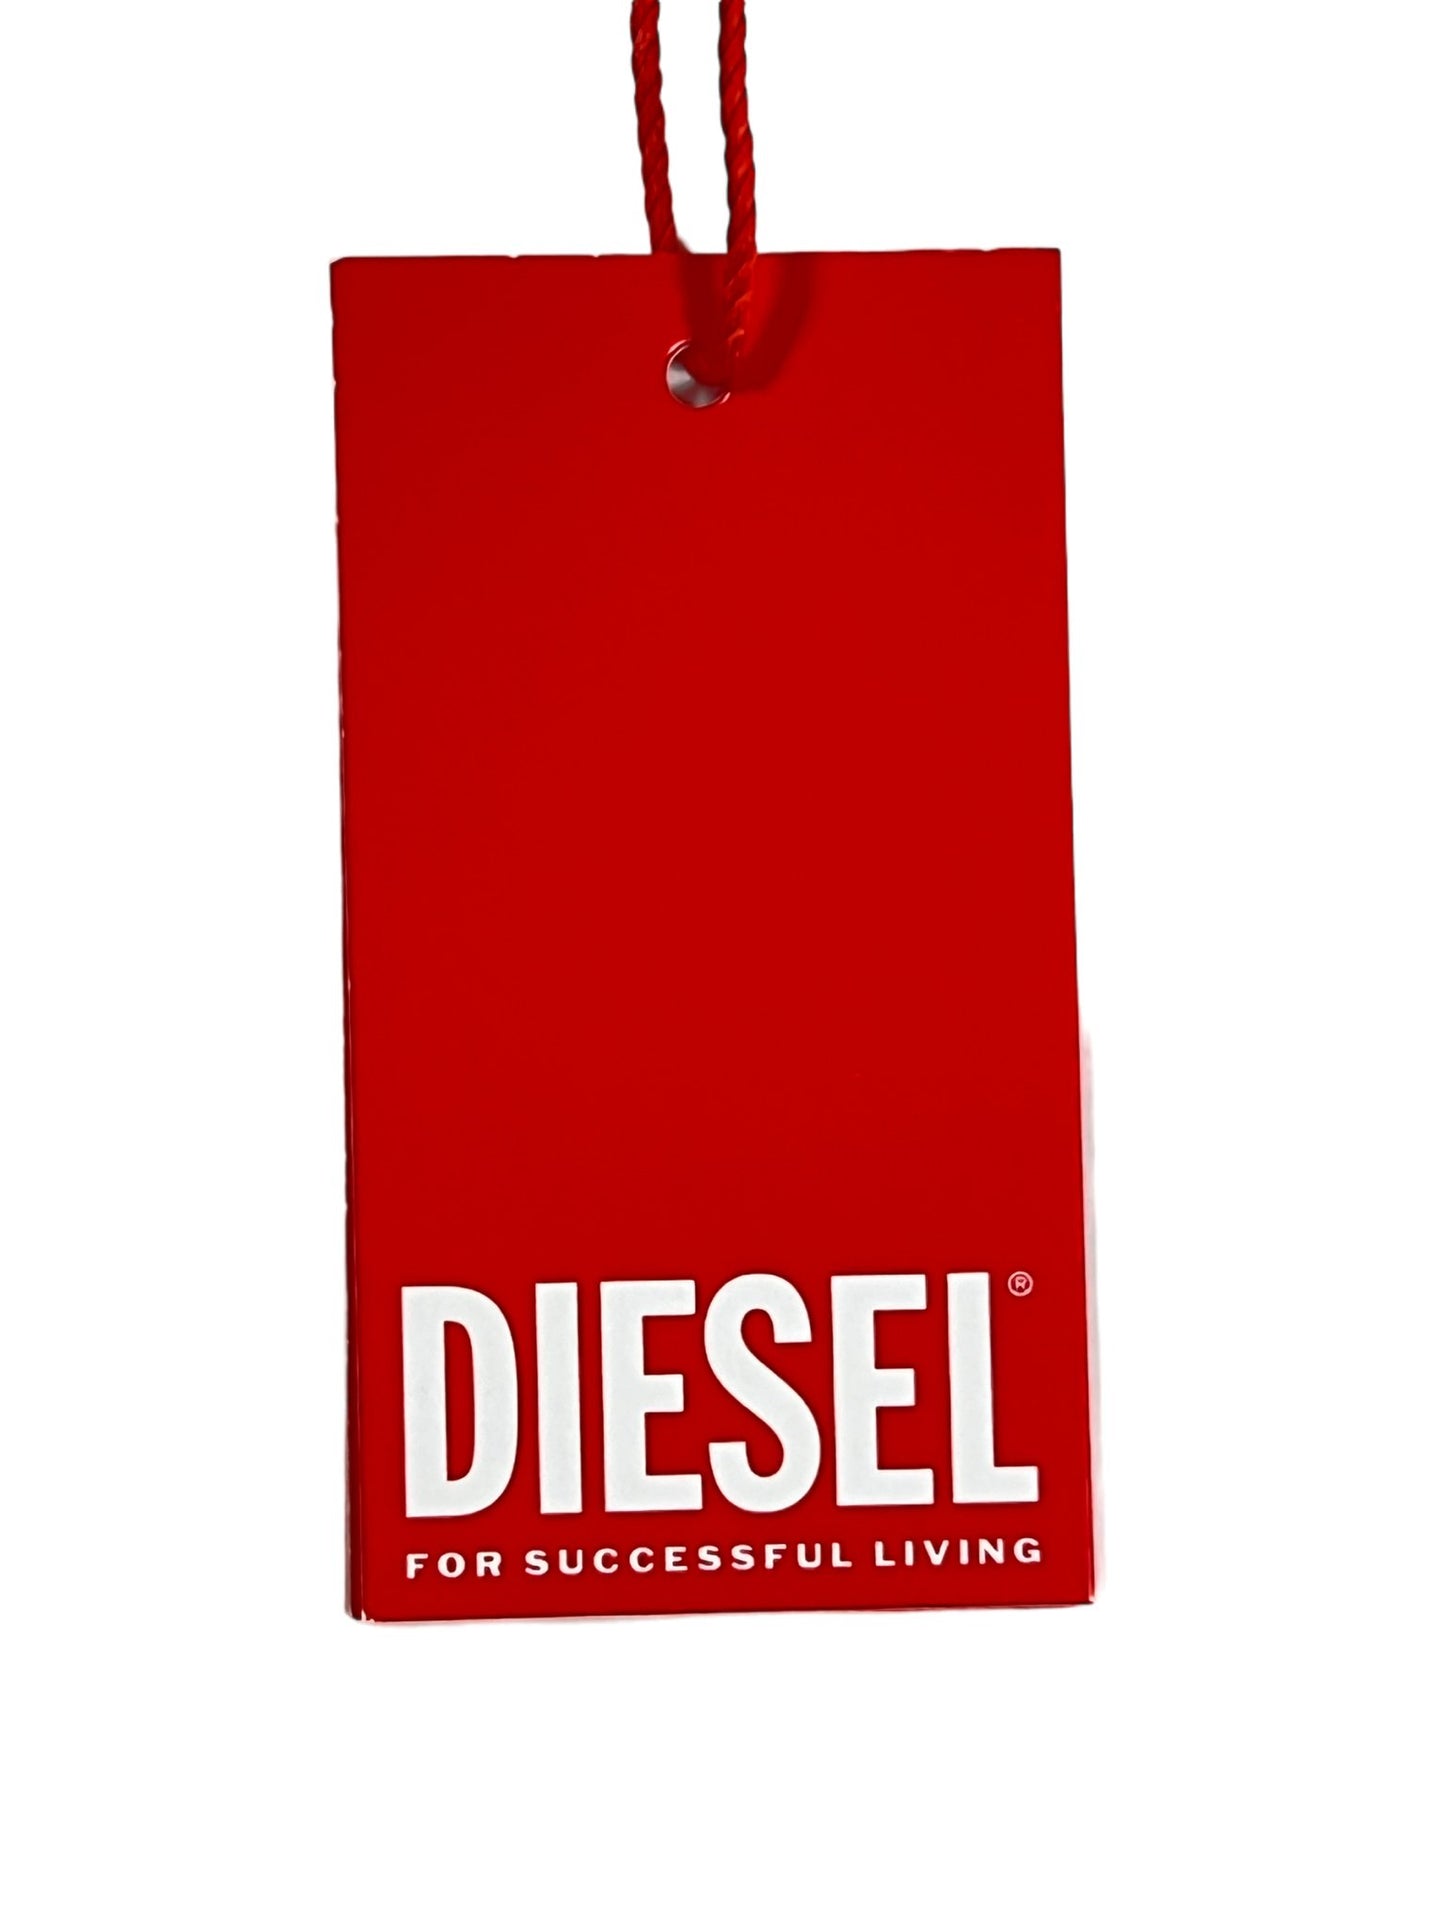 Red DIESEL T-JUST-N14 t-shirt with the slogan "for successful living" on a white background, featuring one of Diesel's iconic logos.